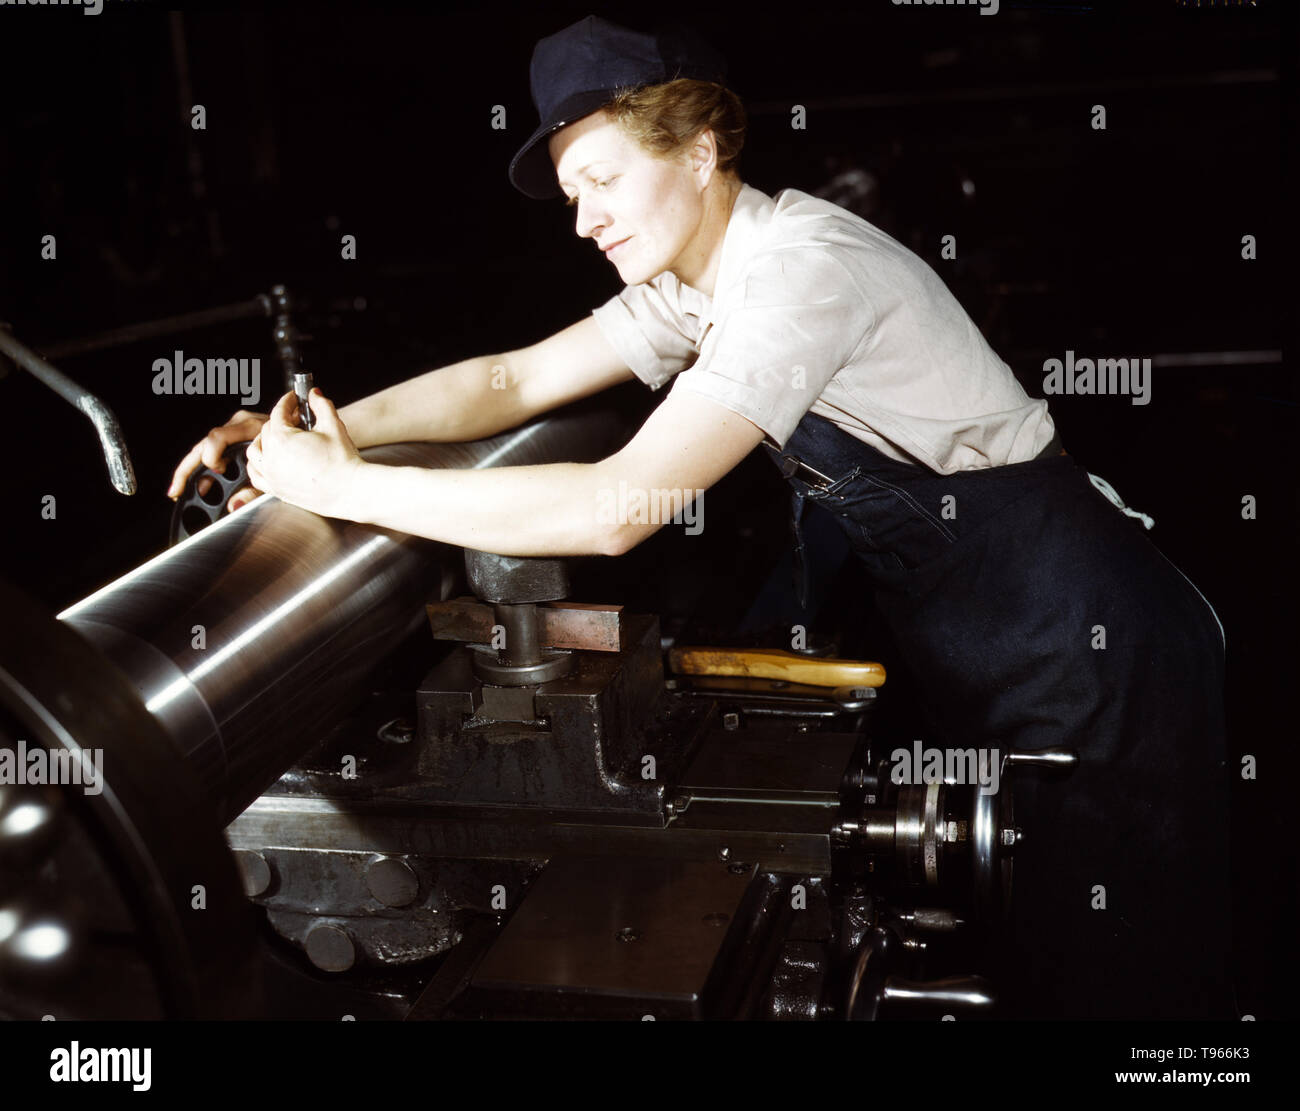 War production workers at the Vilter Manufacturing Company making M5 and M7 guns for the U.S. Army, Milwaukee, Wis. Ex-stage orchestra musician, checking an M7 gun with gage, after turning out on a gun lathe. Her two brothers and husband are in the service Although the image of 'Rosie the Riveter' reflected the industrial work of welders and riveters, the majority of working women filled non-factory positions in every sector of the economy.  Photographed by Howard R. Hollem, 1943. Stock Photo